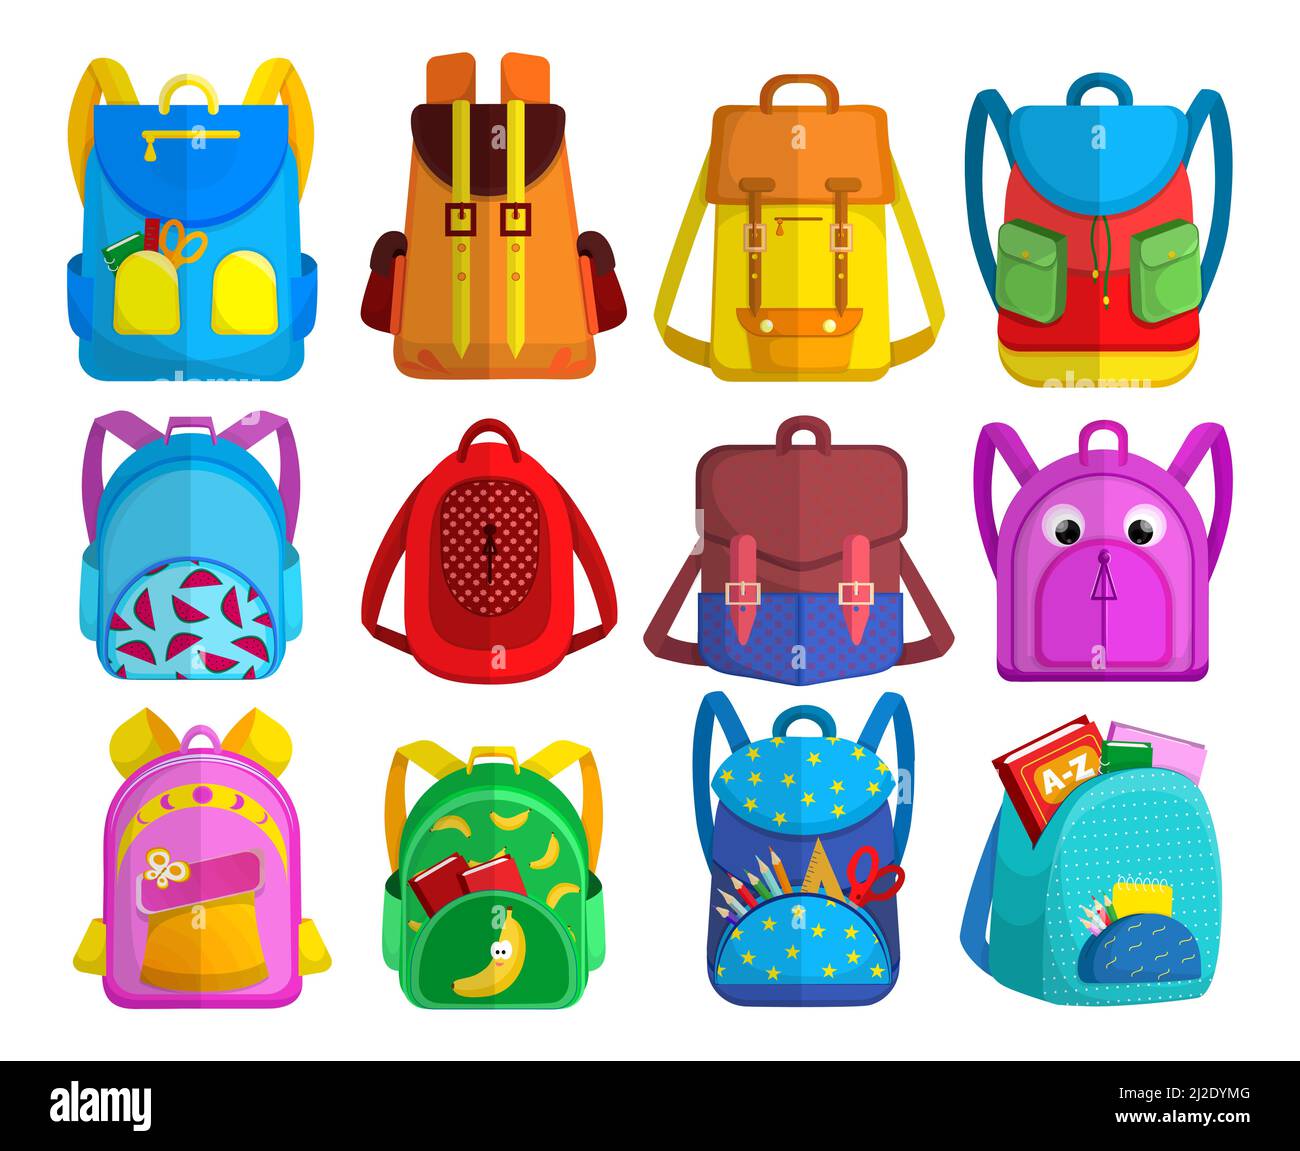 Bright childish backpacks collection. Colorful schoolbags for primary school kids with books and supplies in open pockets, bags and rucksacks. Flat ve Stock Vector